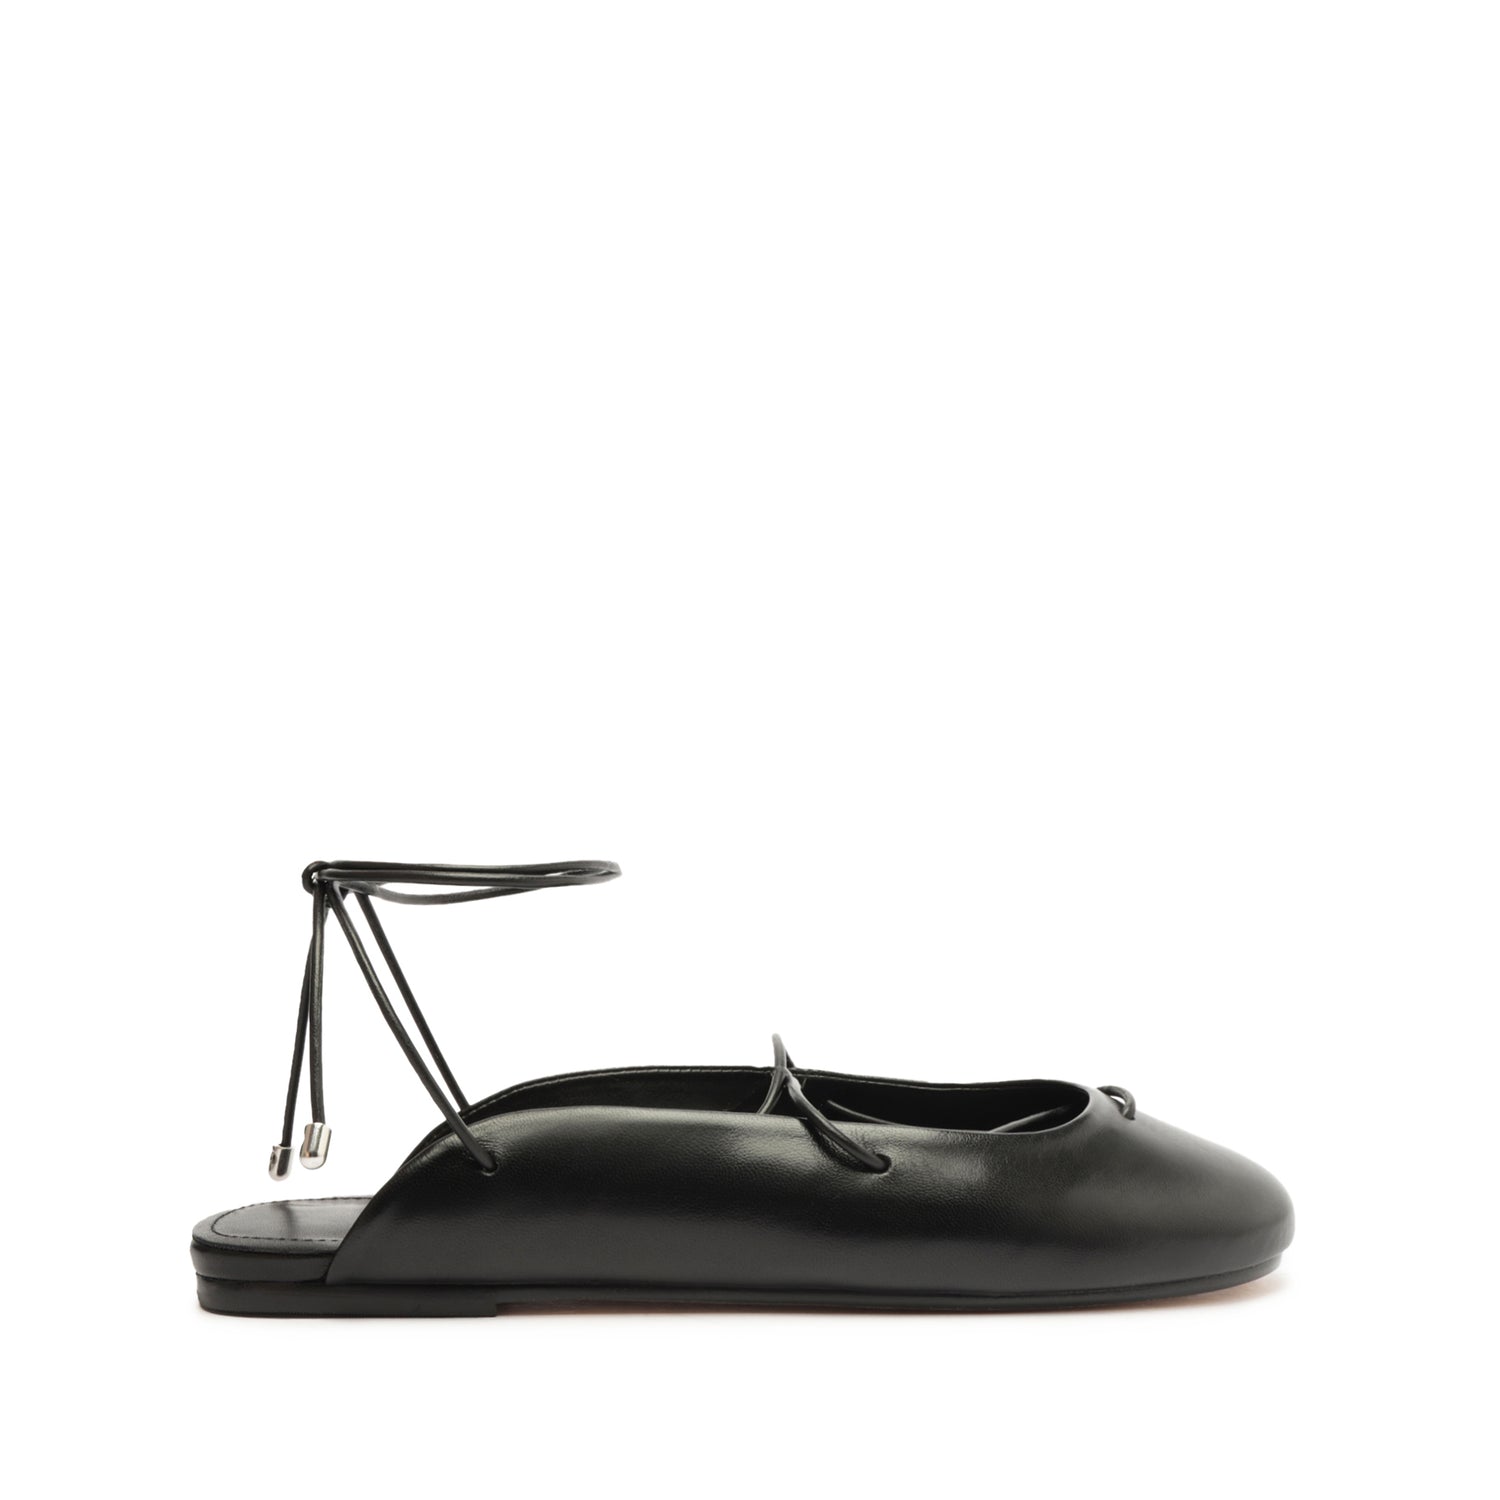 Cami Casual Leather Flat Flats Fall 23 5 Black Nappa Leather - Schutz Shoes